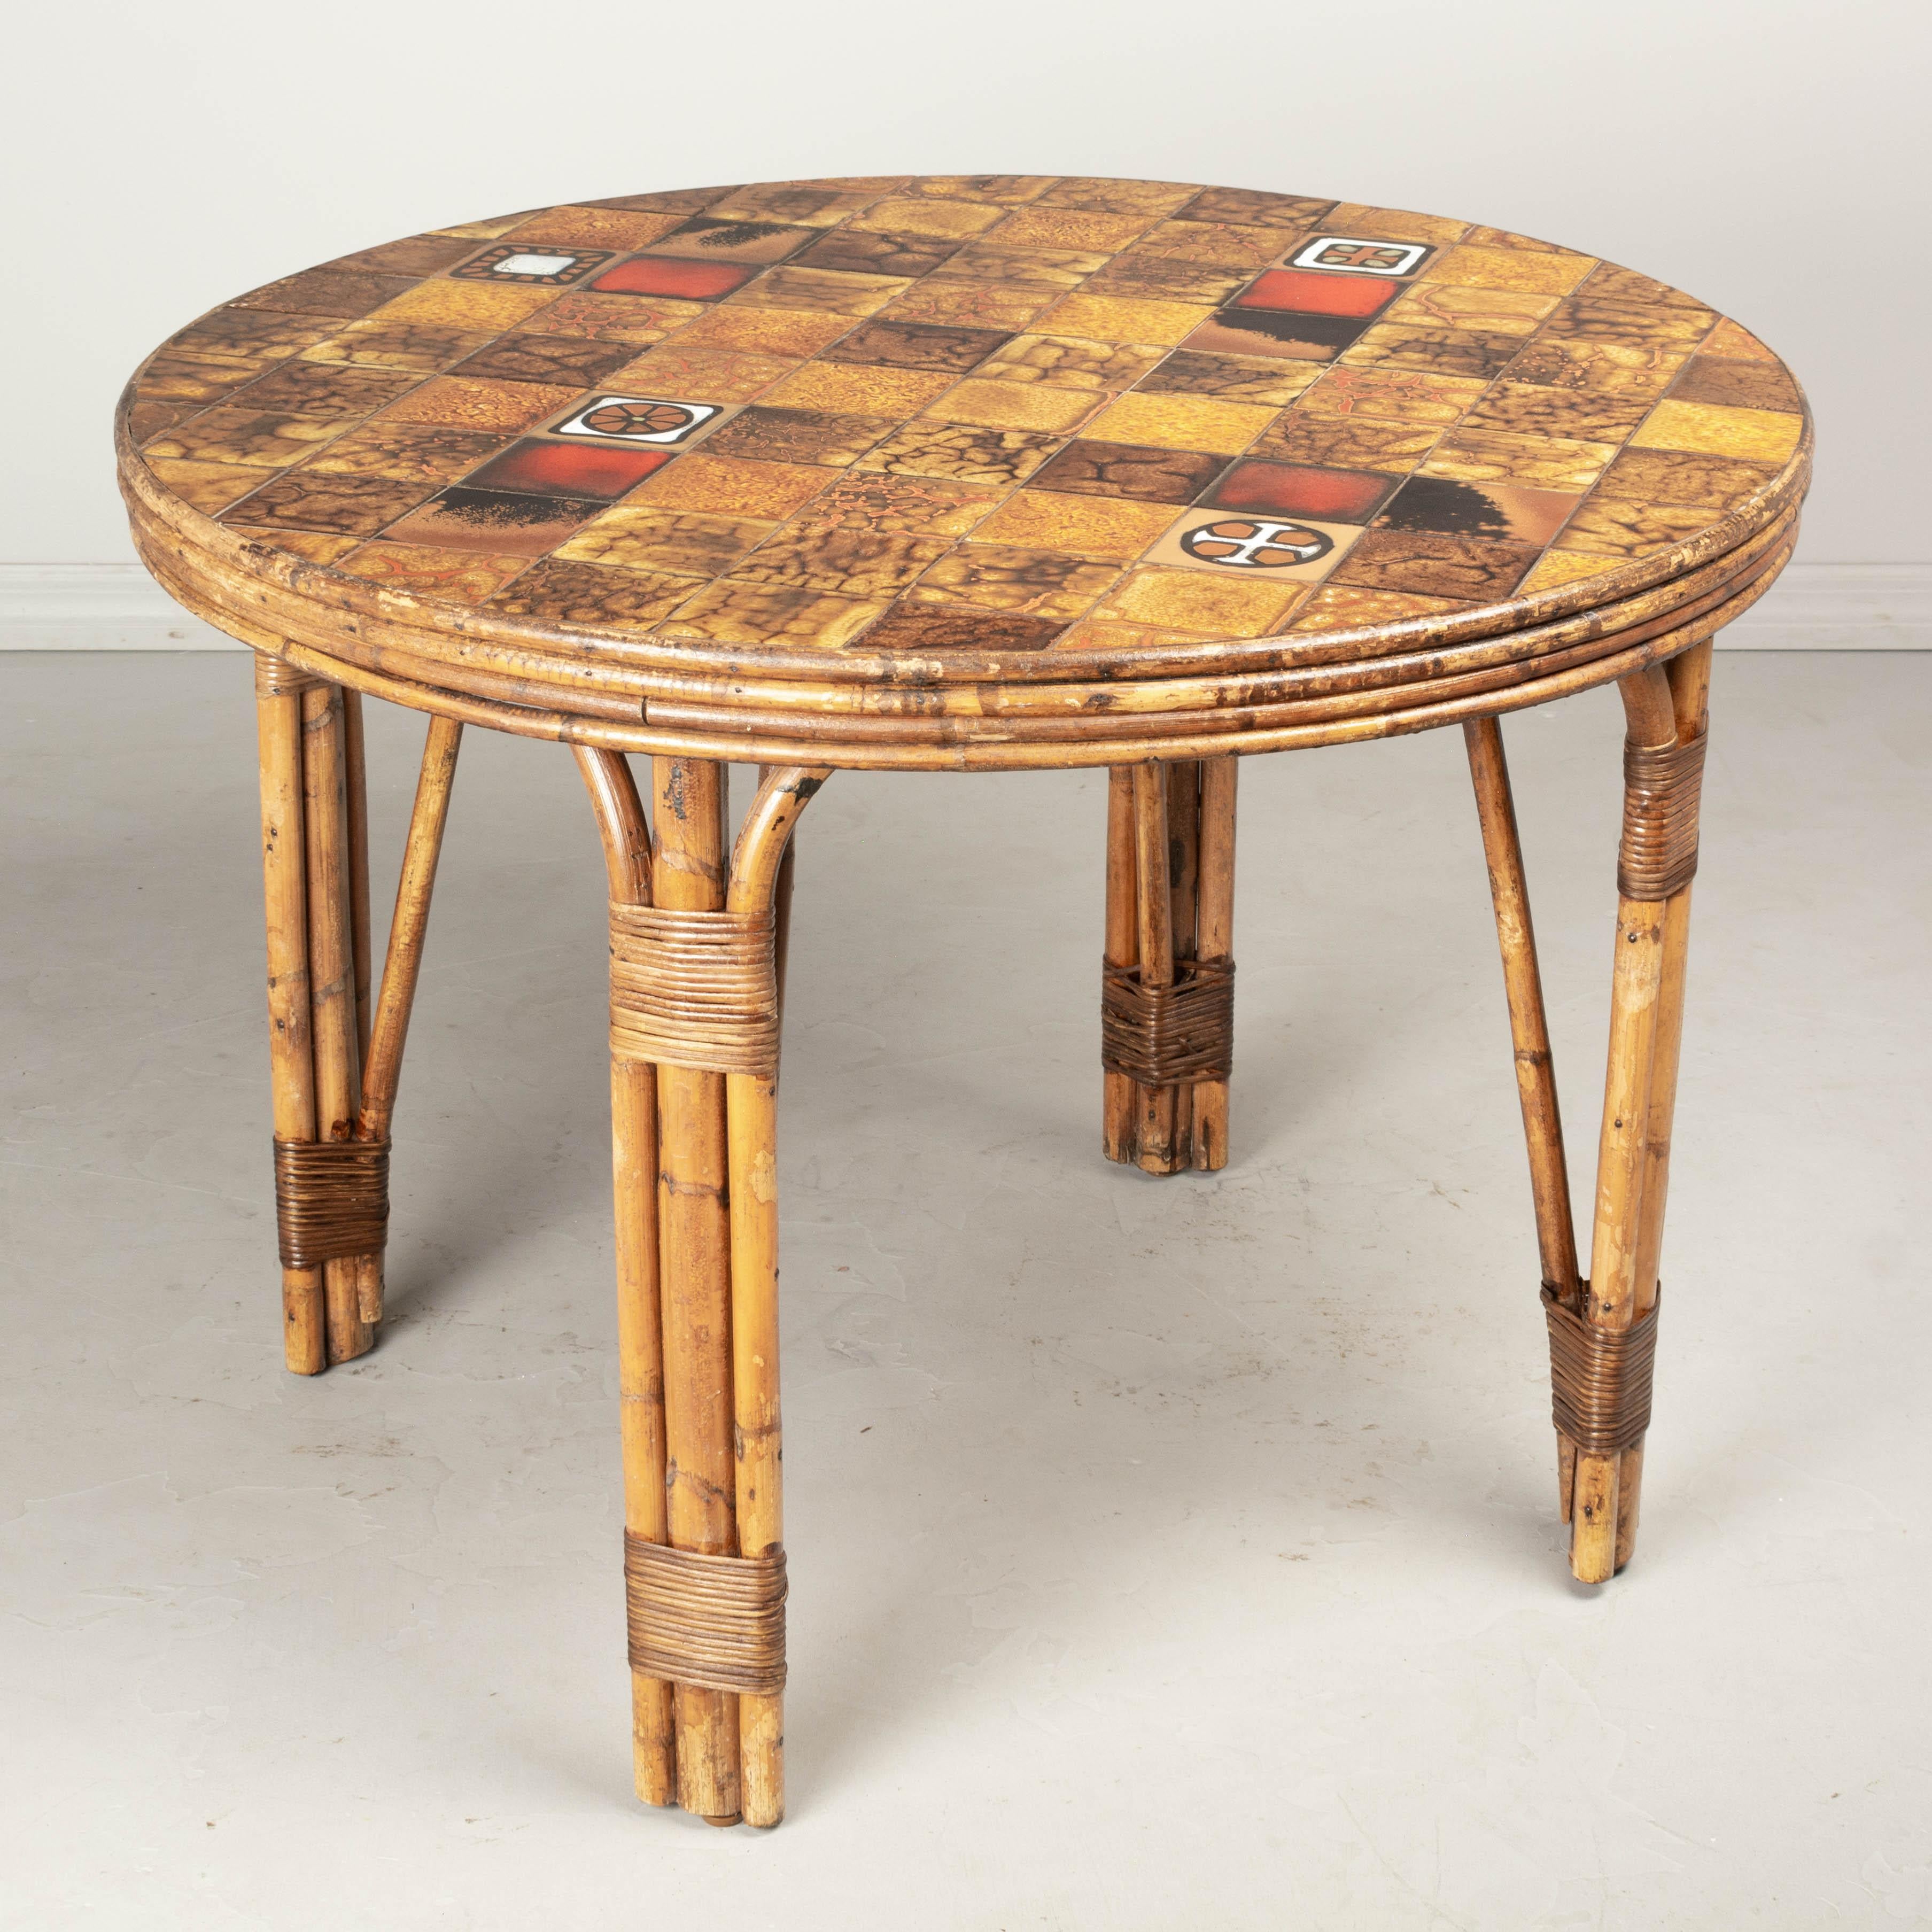 A vintage French Vallauris pottery tile top table with sturdy rattan base. Each glazed ceramic tile is unique and laid out in a random mosaic design. Mid century style typical in the South of France and the French Riviera. In good condition with